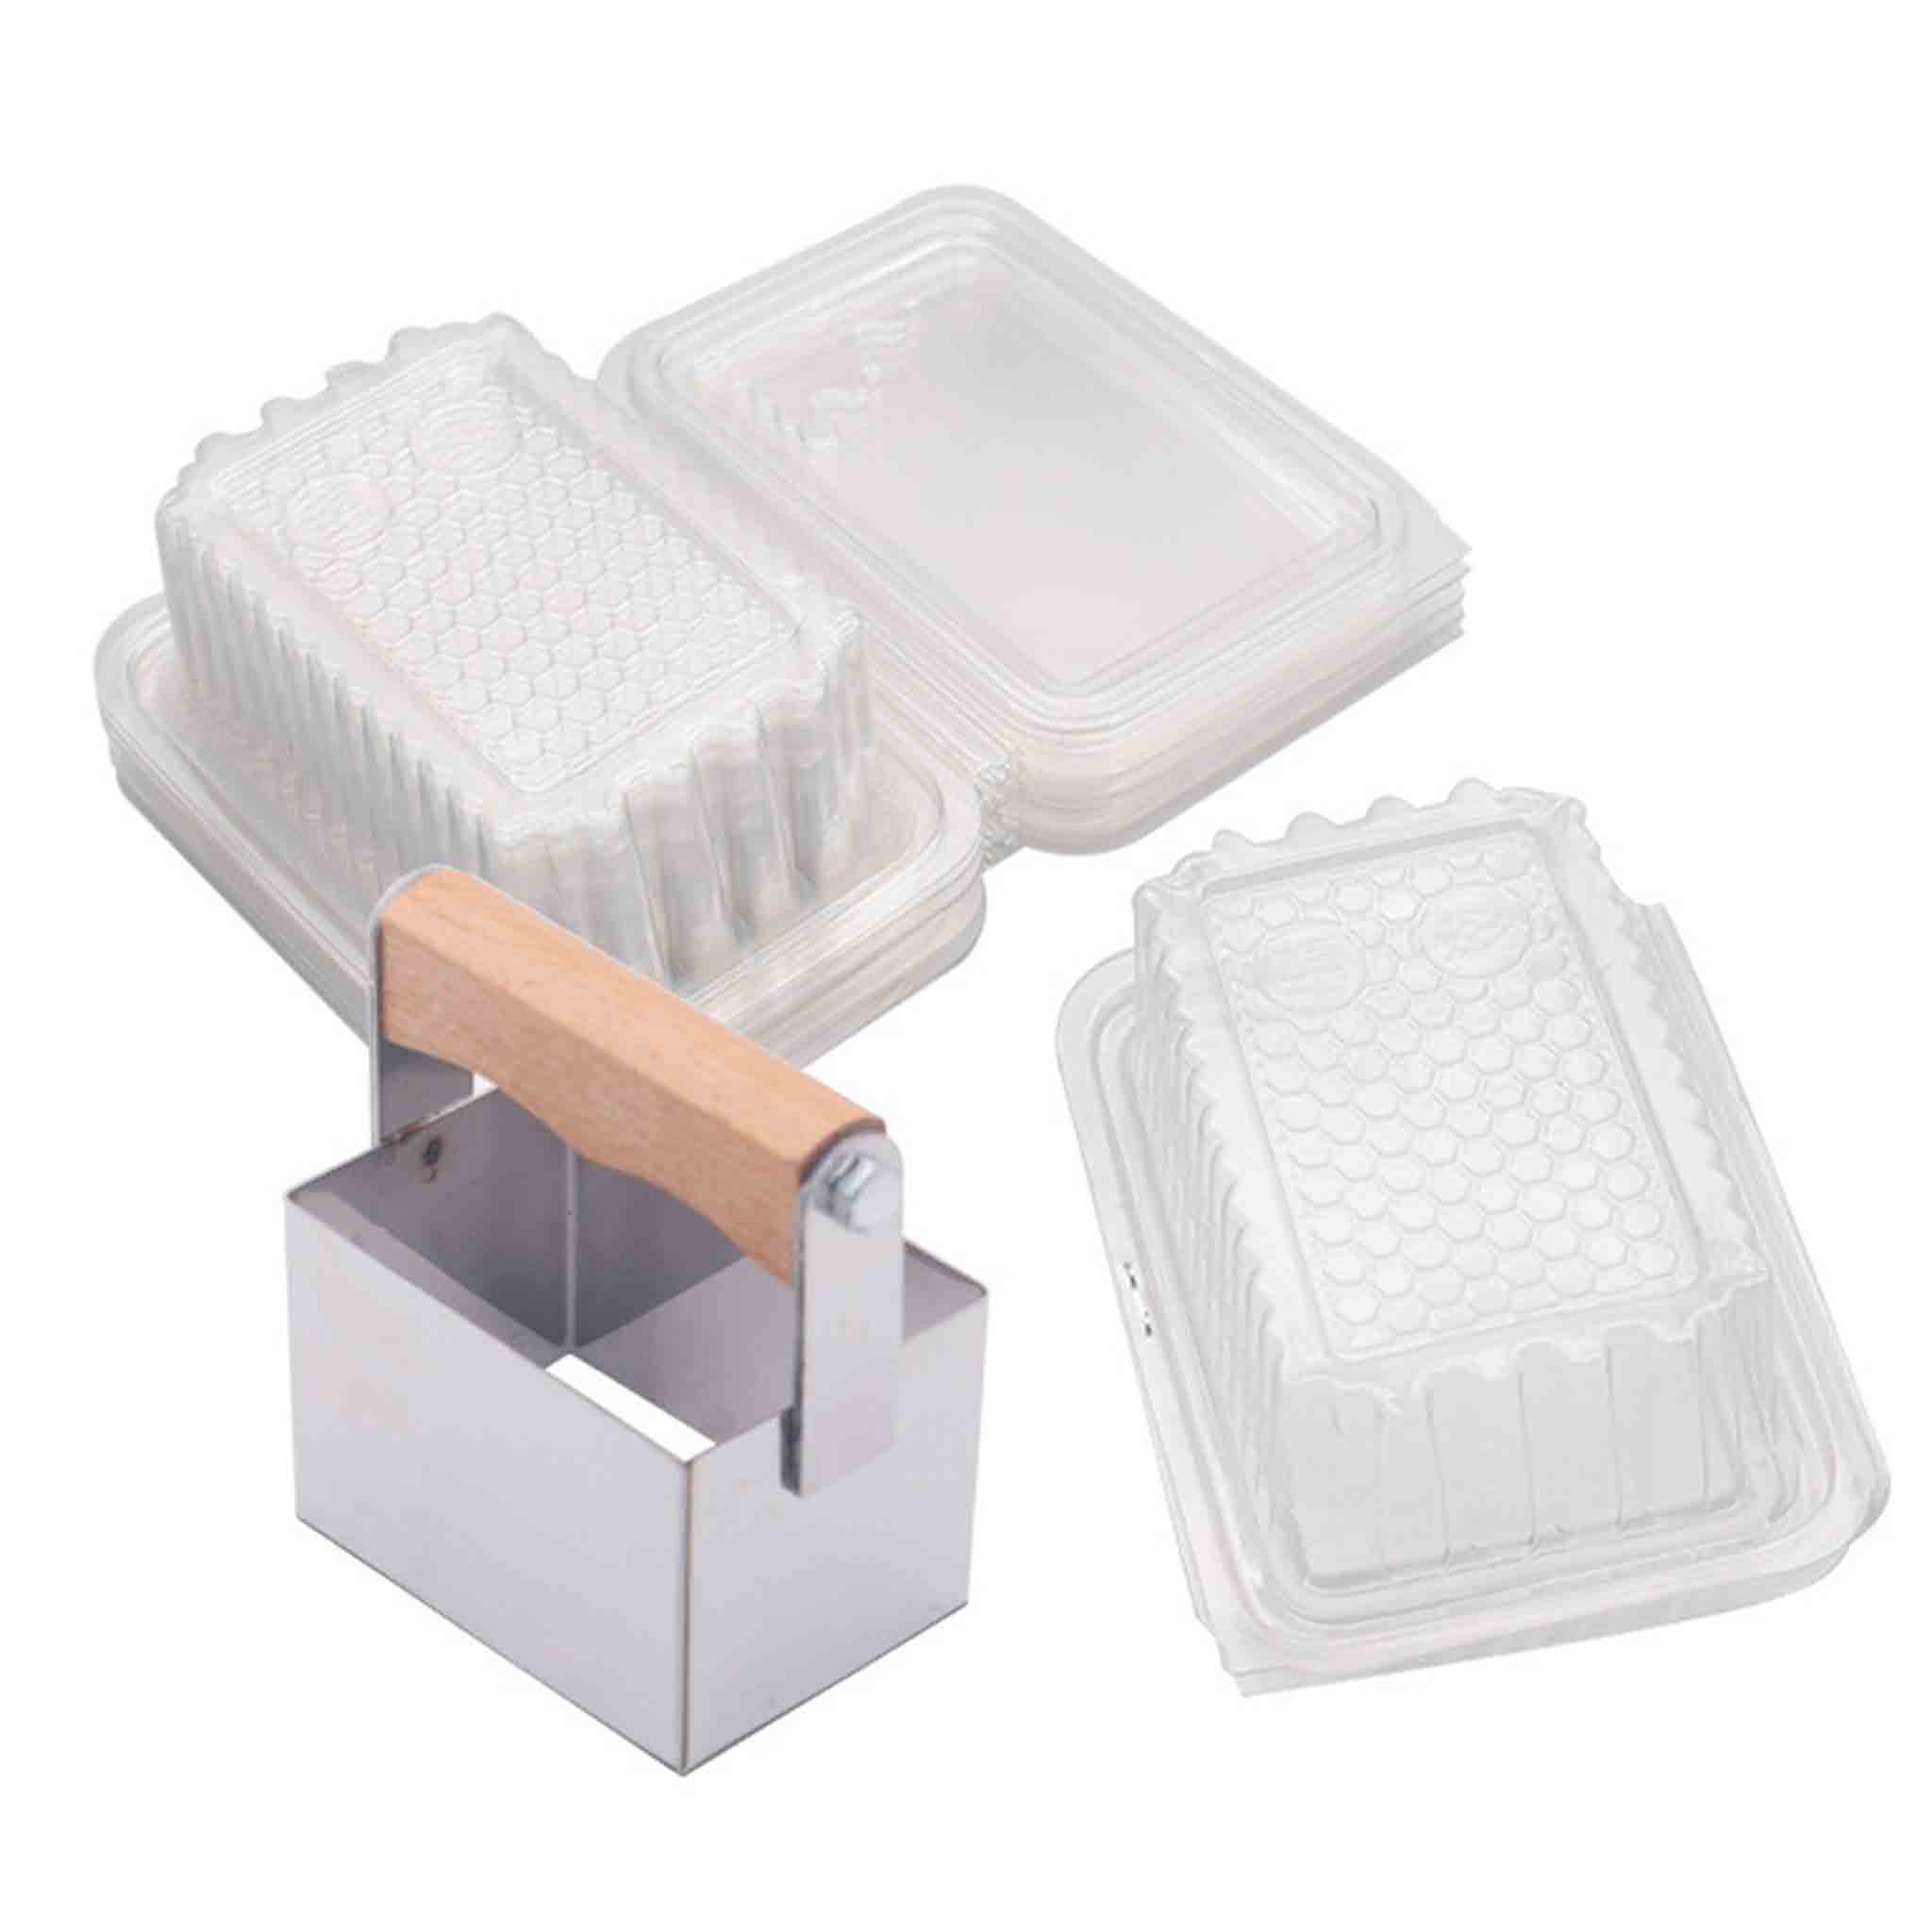 Honey Comb Packaging Container for Medium Sized Honey Comb - Processing collection by Buzzbee Beekeeping Supplies